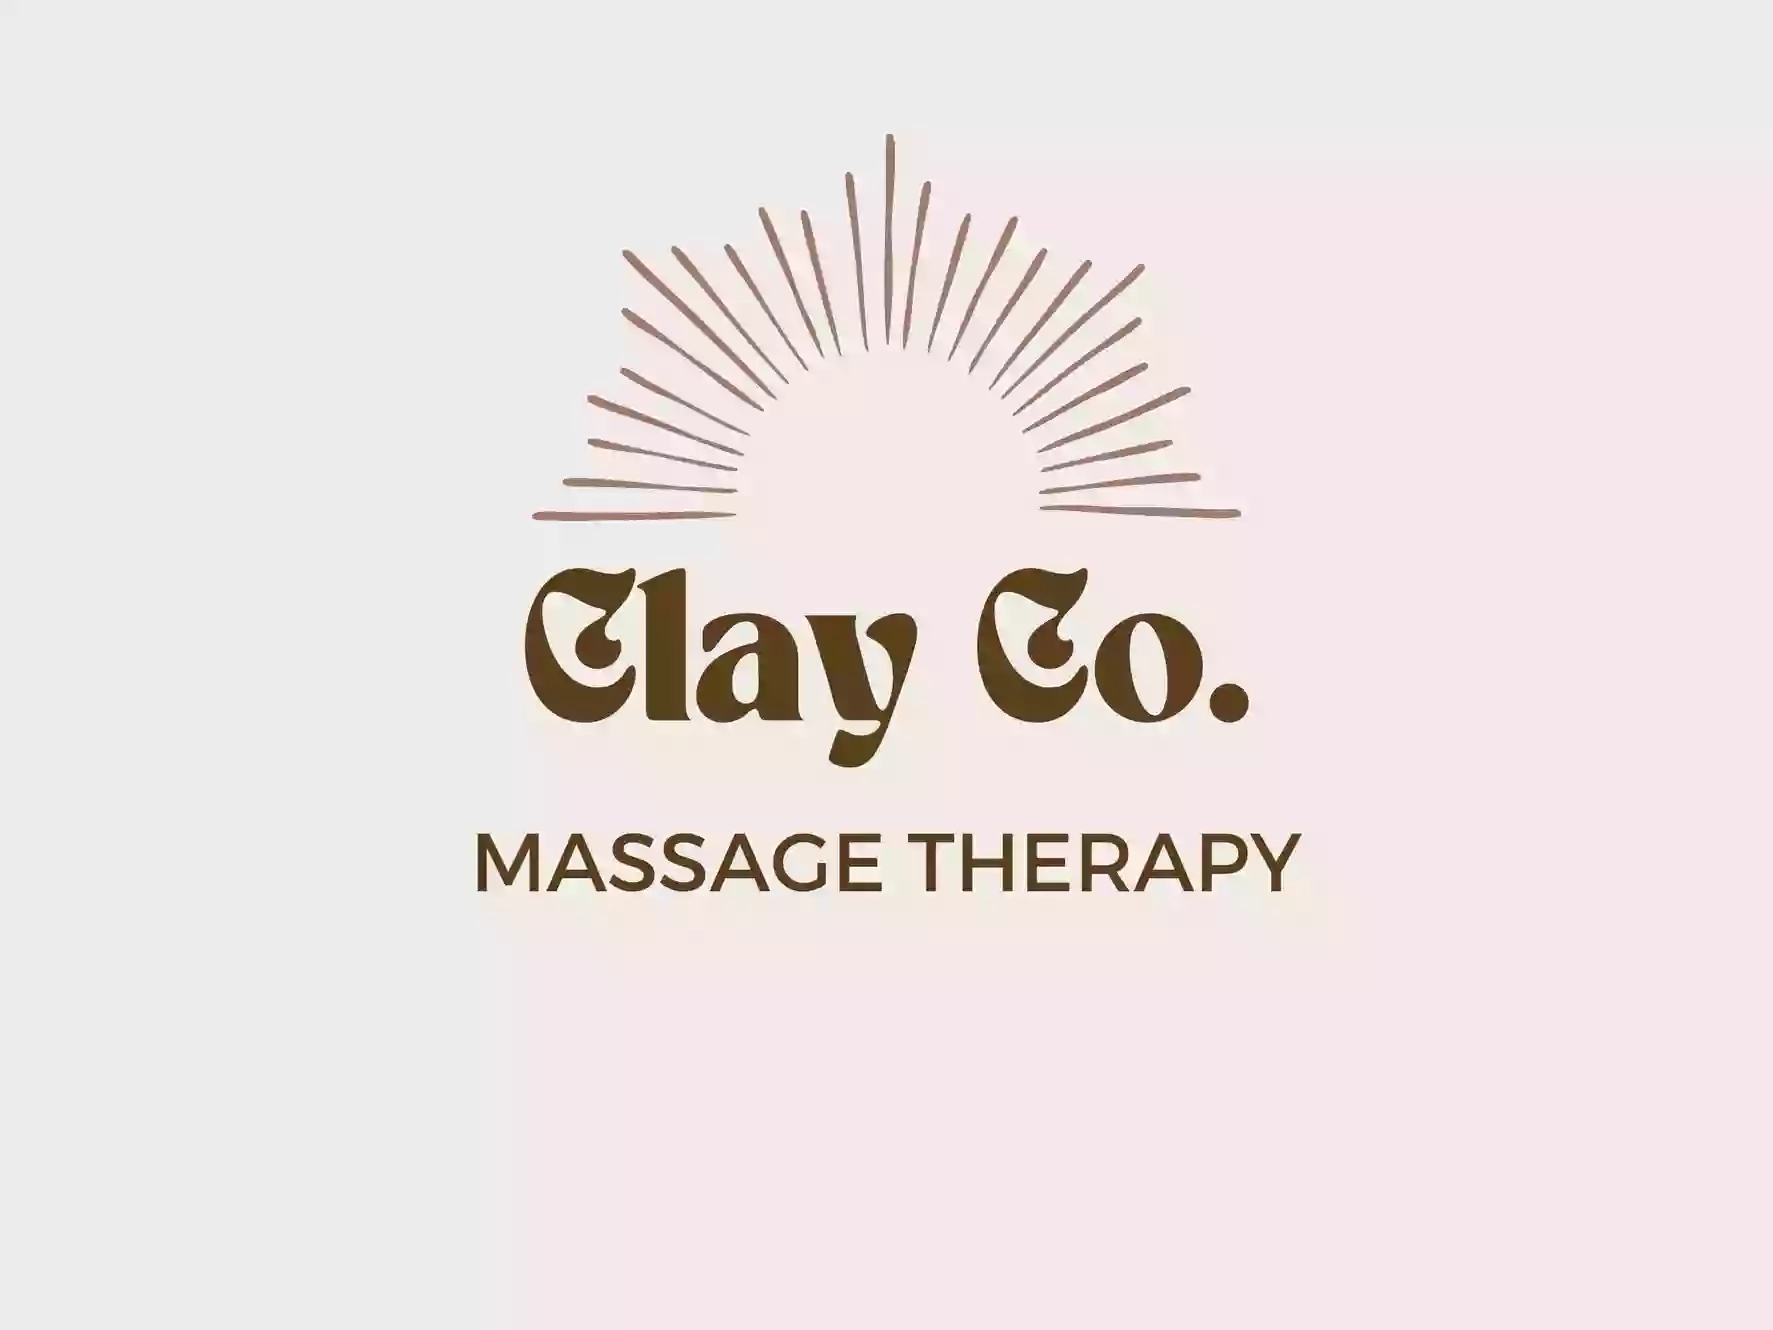 Clay Co. Massage Therapy LLC